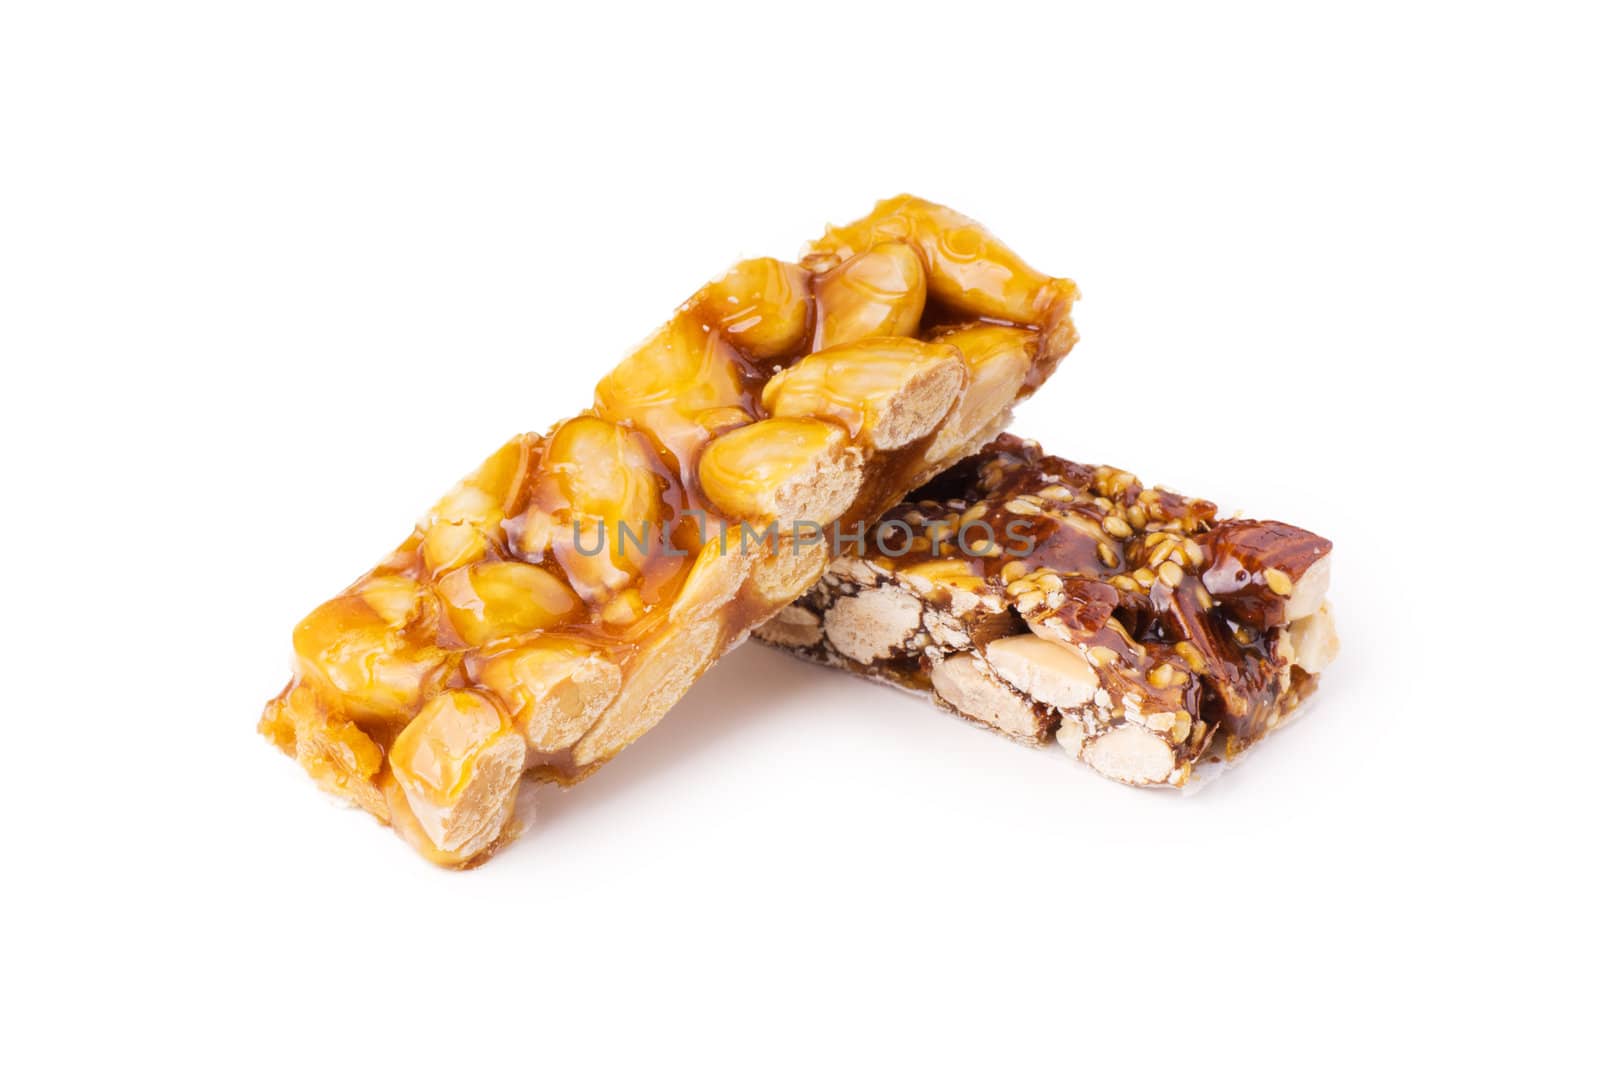 Two honey bars with peanuts and sesame seeds on white background